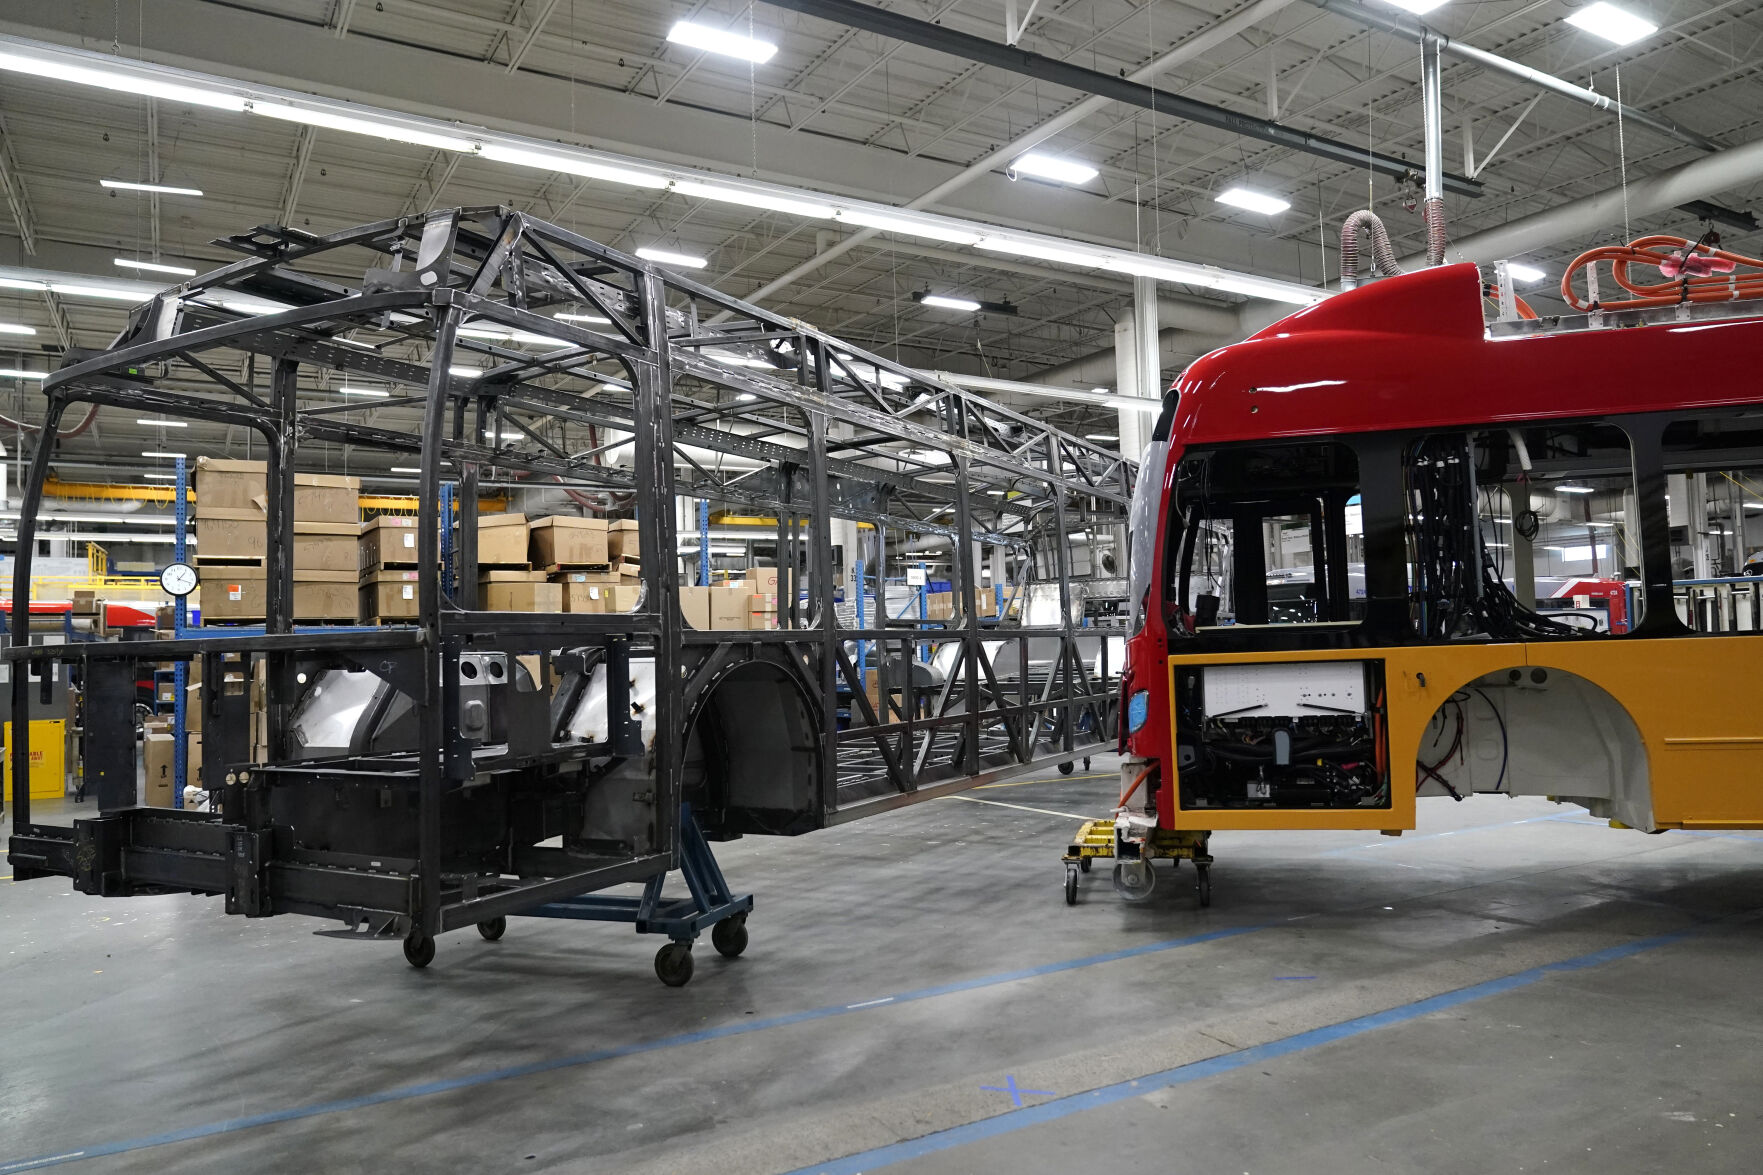 <p>File - Parts of electric busses are viewed at New Flyer, an electric vehicles manufacturing company, Feb. 9, 2023, in St. Cloud, Minn. On Friday, the Labor Department releases producer prices data for December. (AP Photo/Abbie Parr)</p>   PHOTO CREDIT: Abbie Parr - staff, ASSOCIATED PRESS